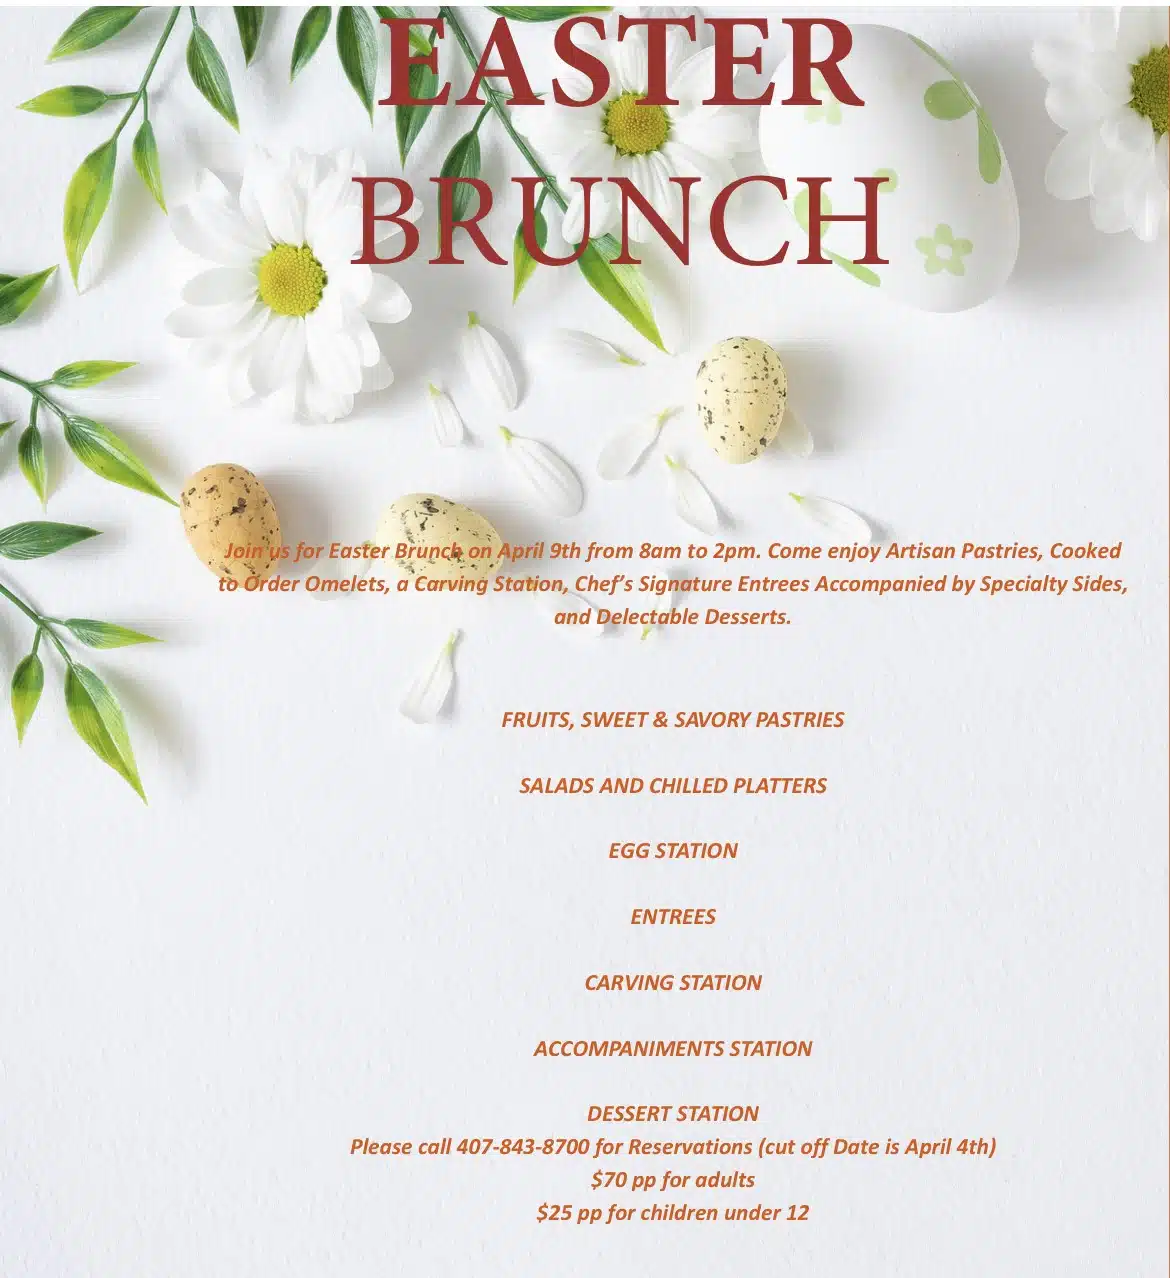 Come celebrate Easter at the Crowne Plaza Orlando